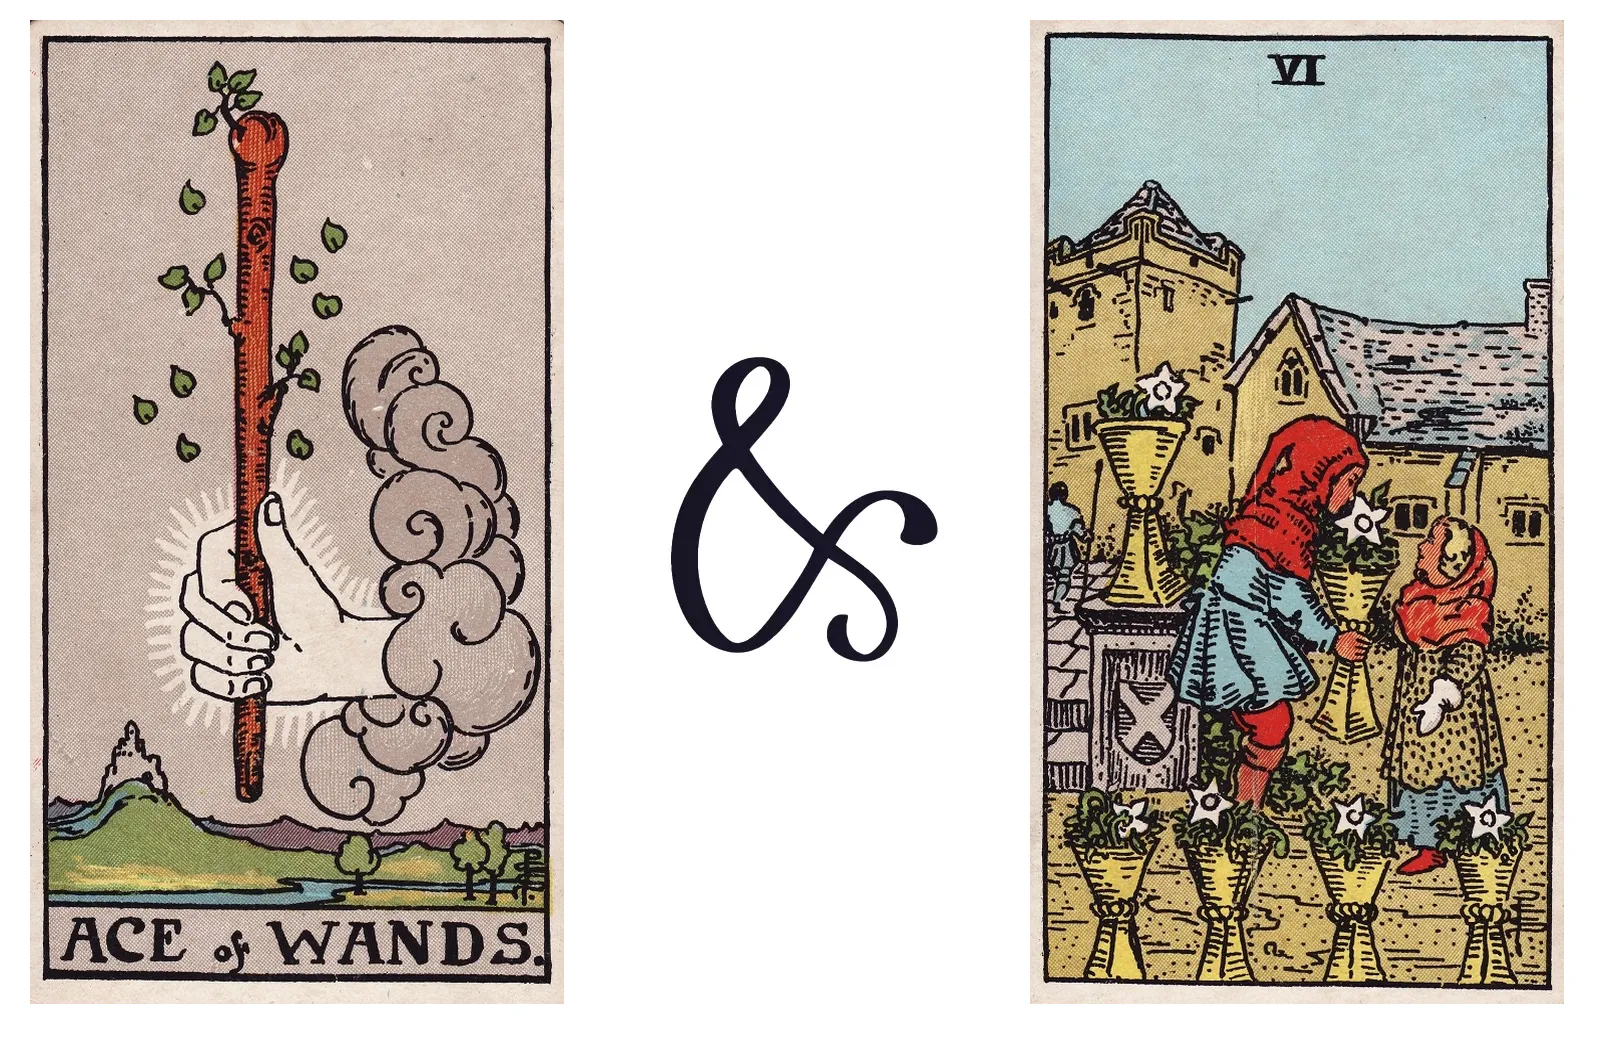 Ace of Wands and Six of Cups